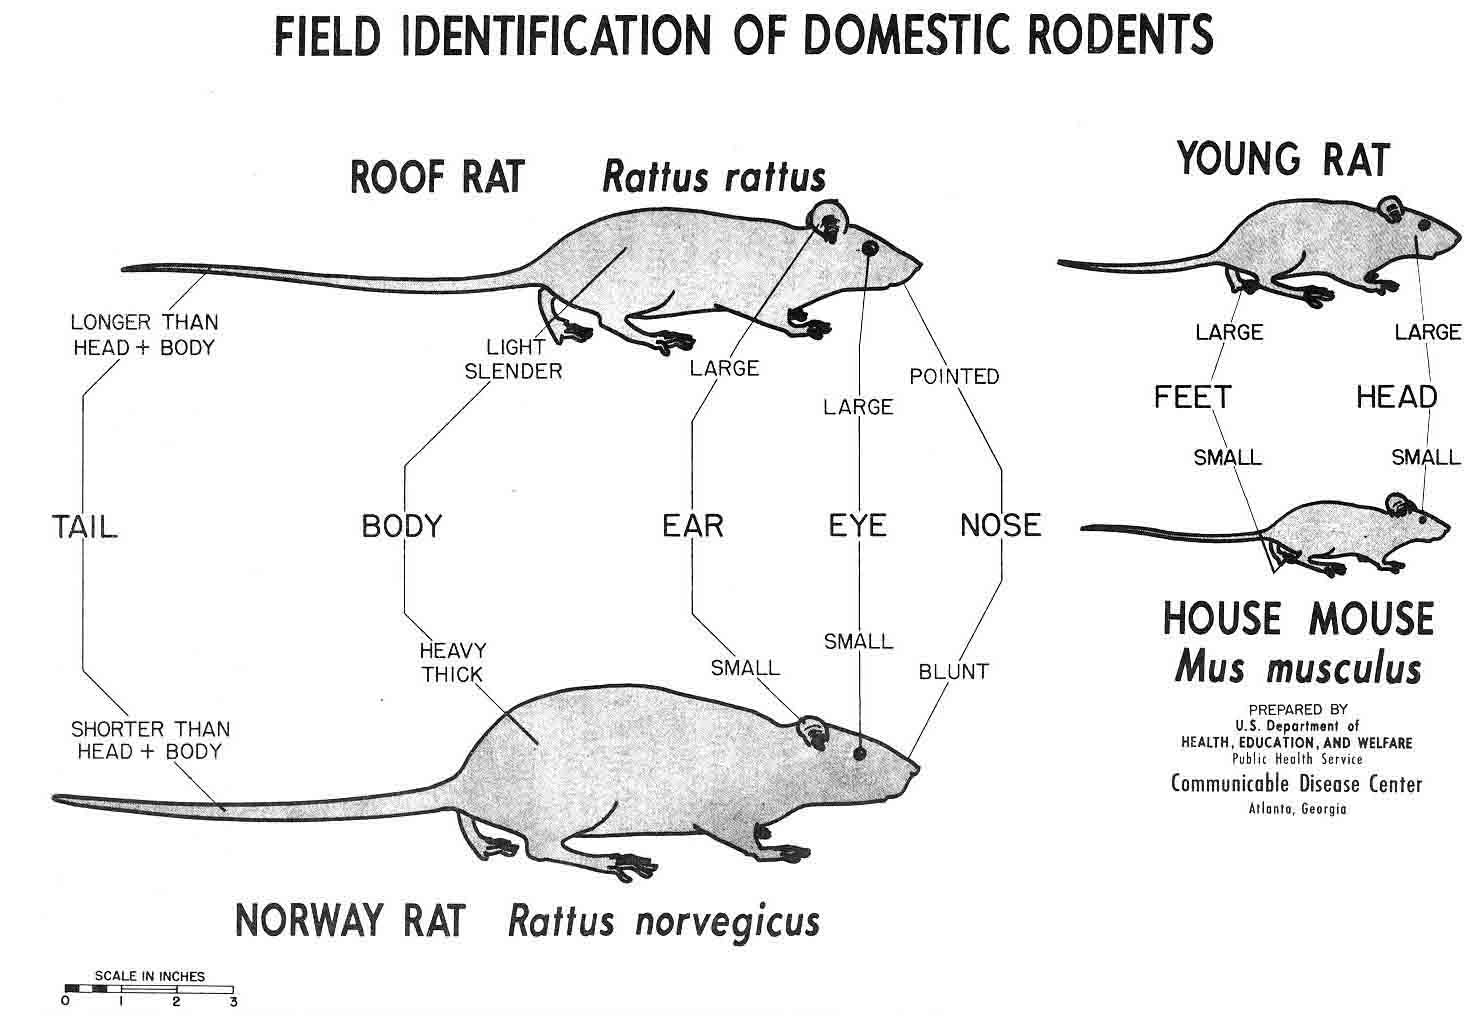 Figure 4.1. Field Identification of Domestic Rodents